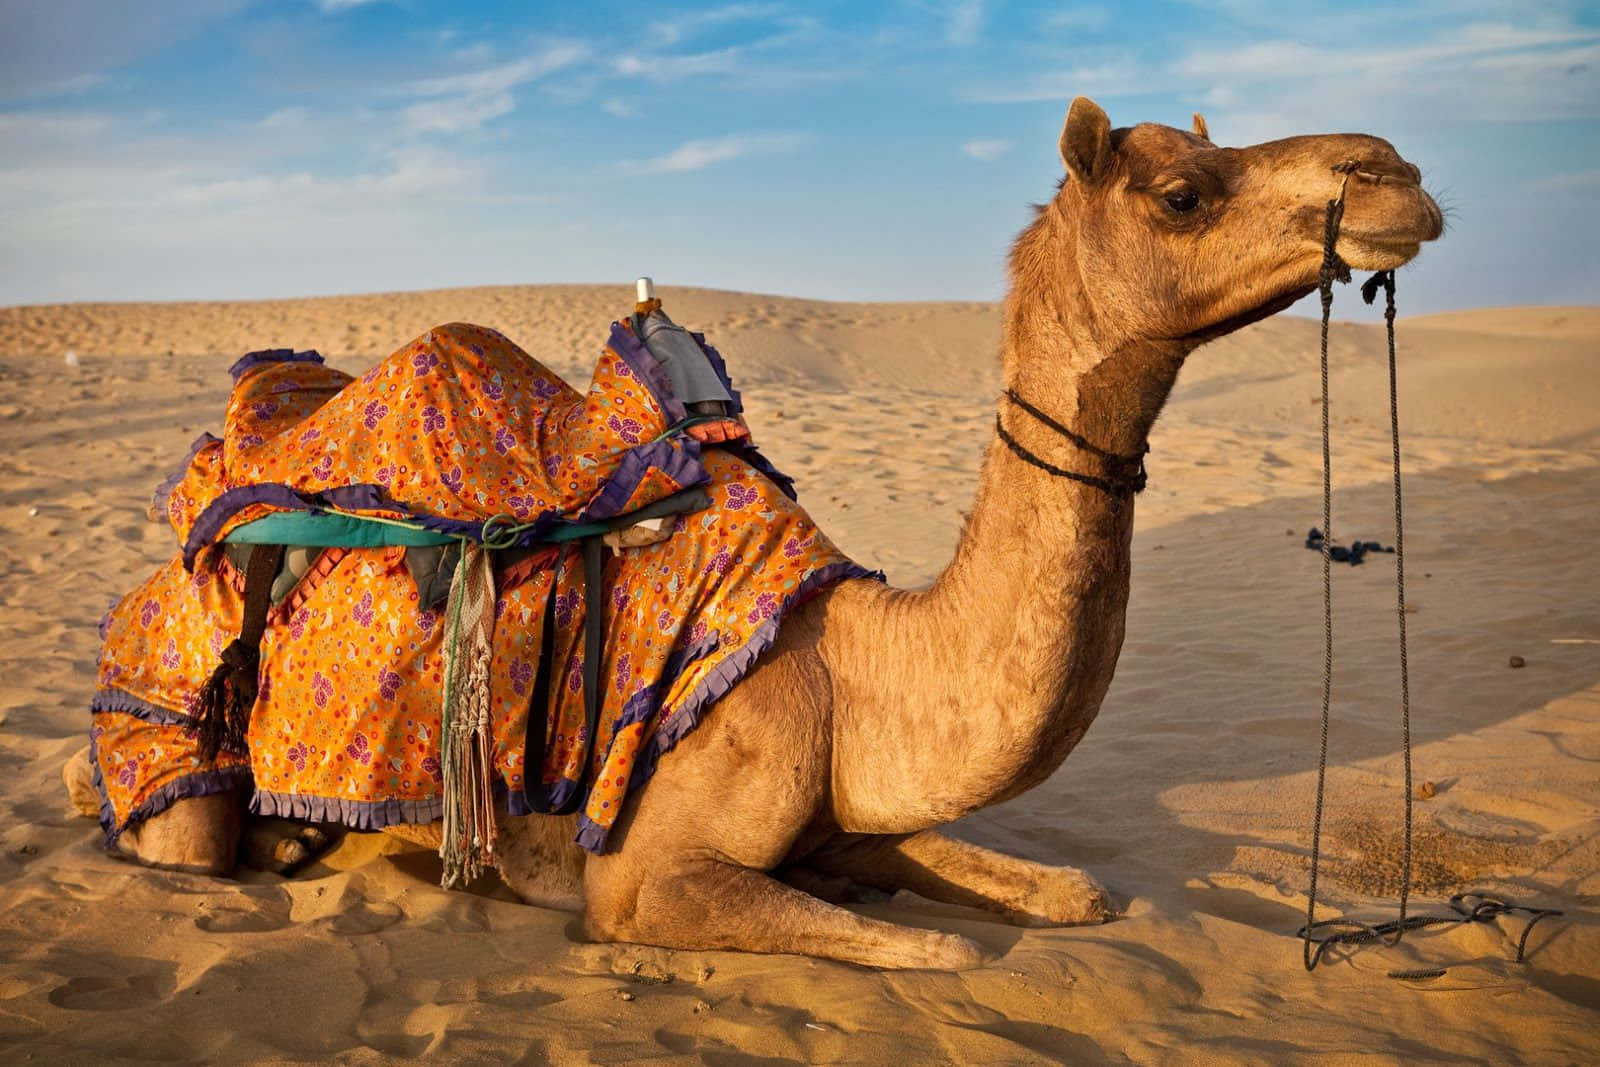 Explore the Desert on the Back of a Camel